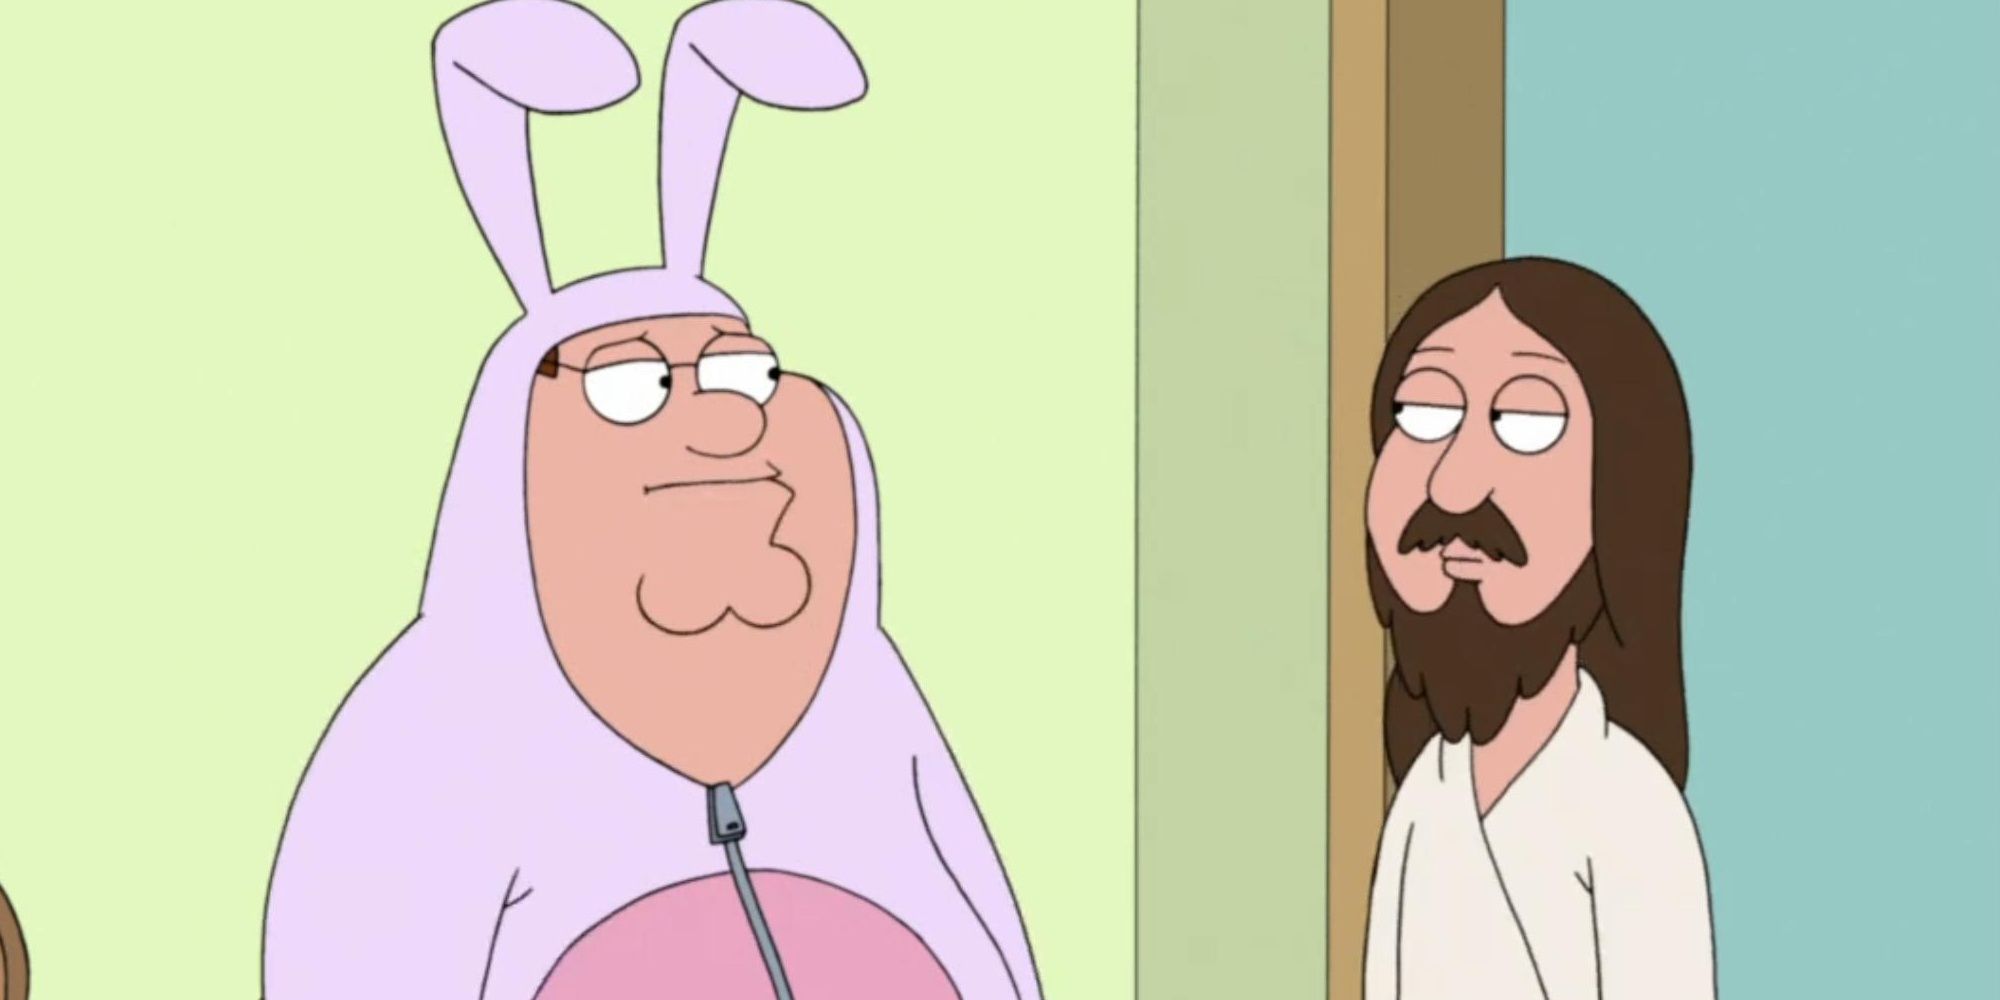 Peter dressed as the Easter Bunny in front of Jesus in Family Guy